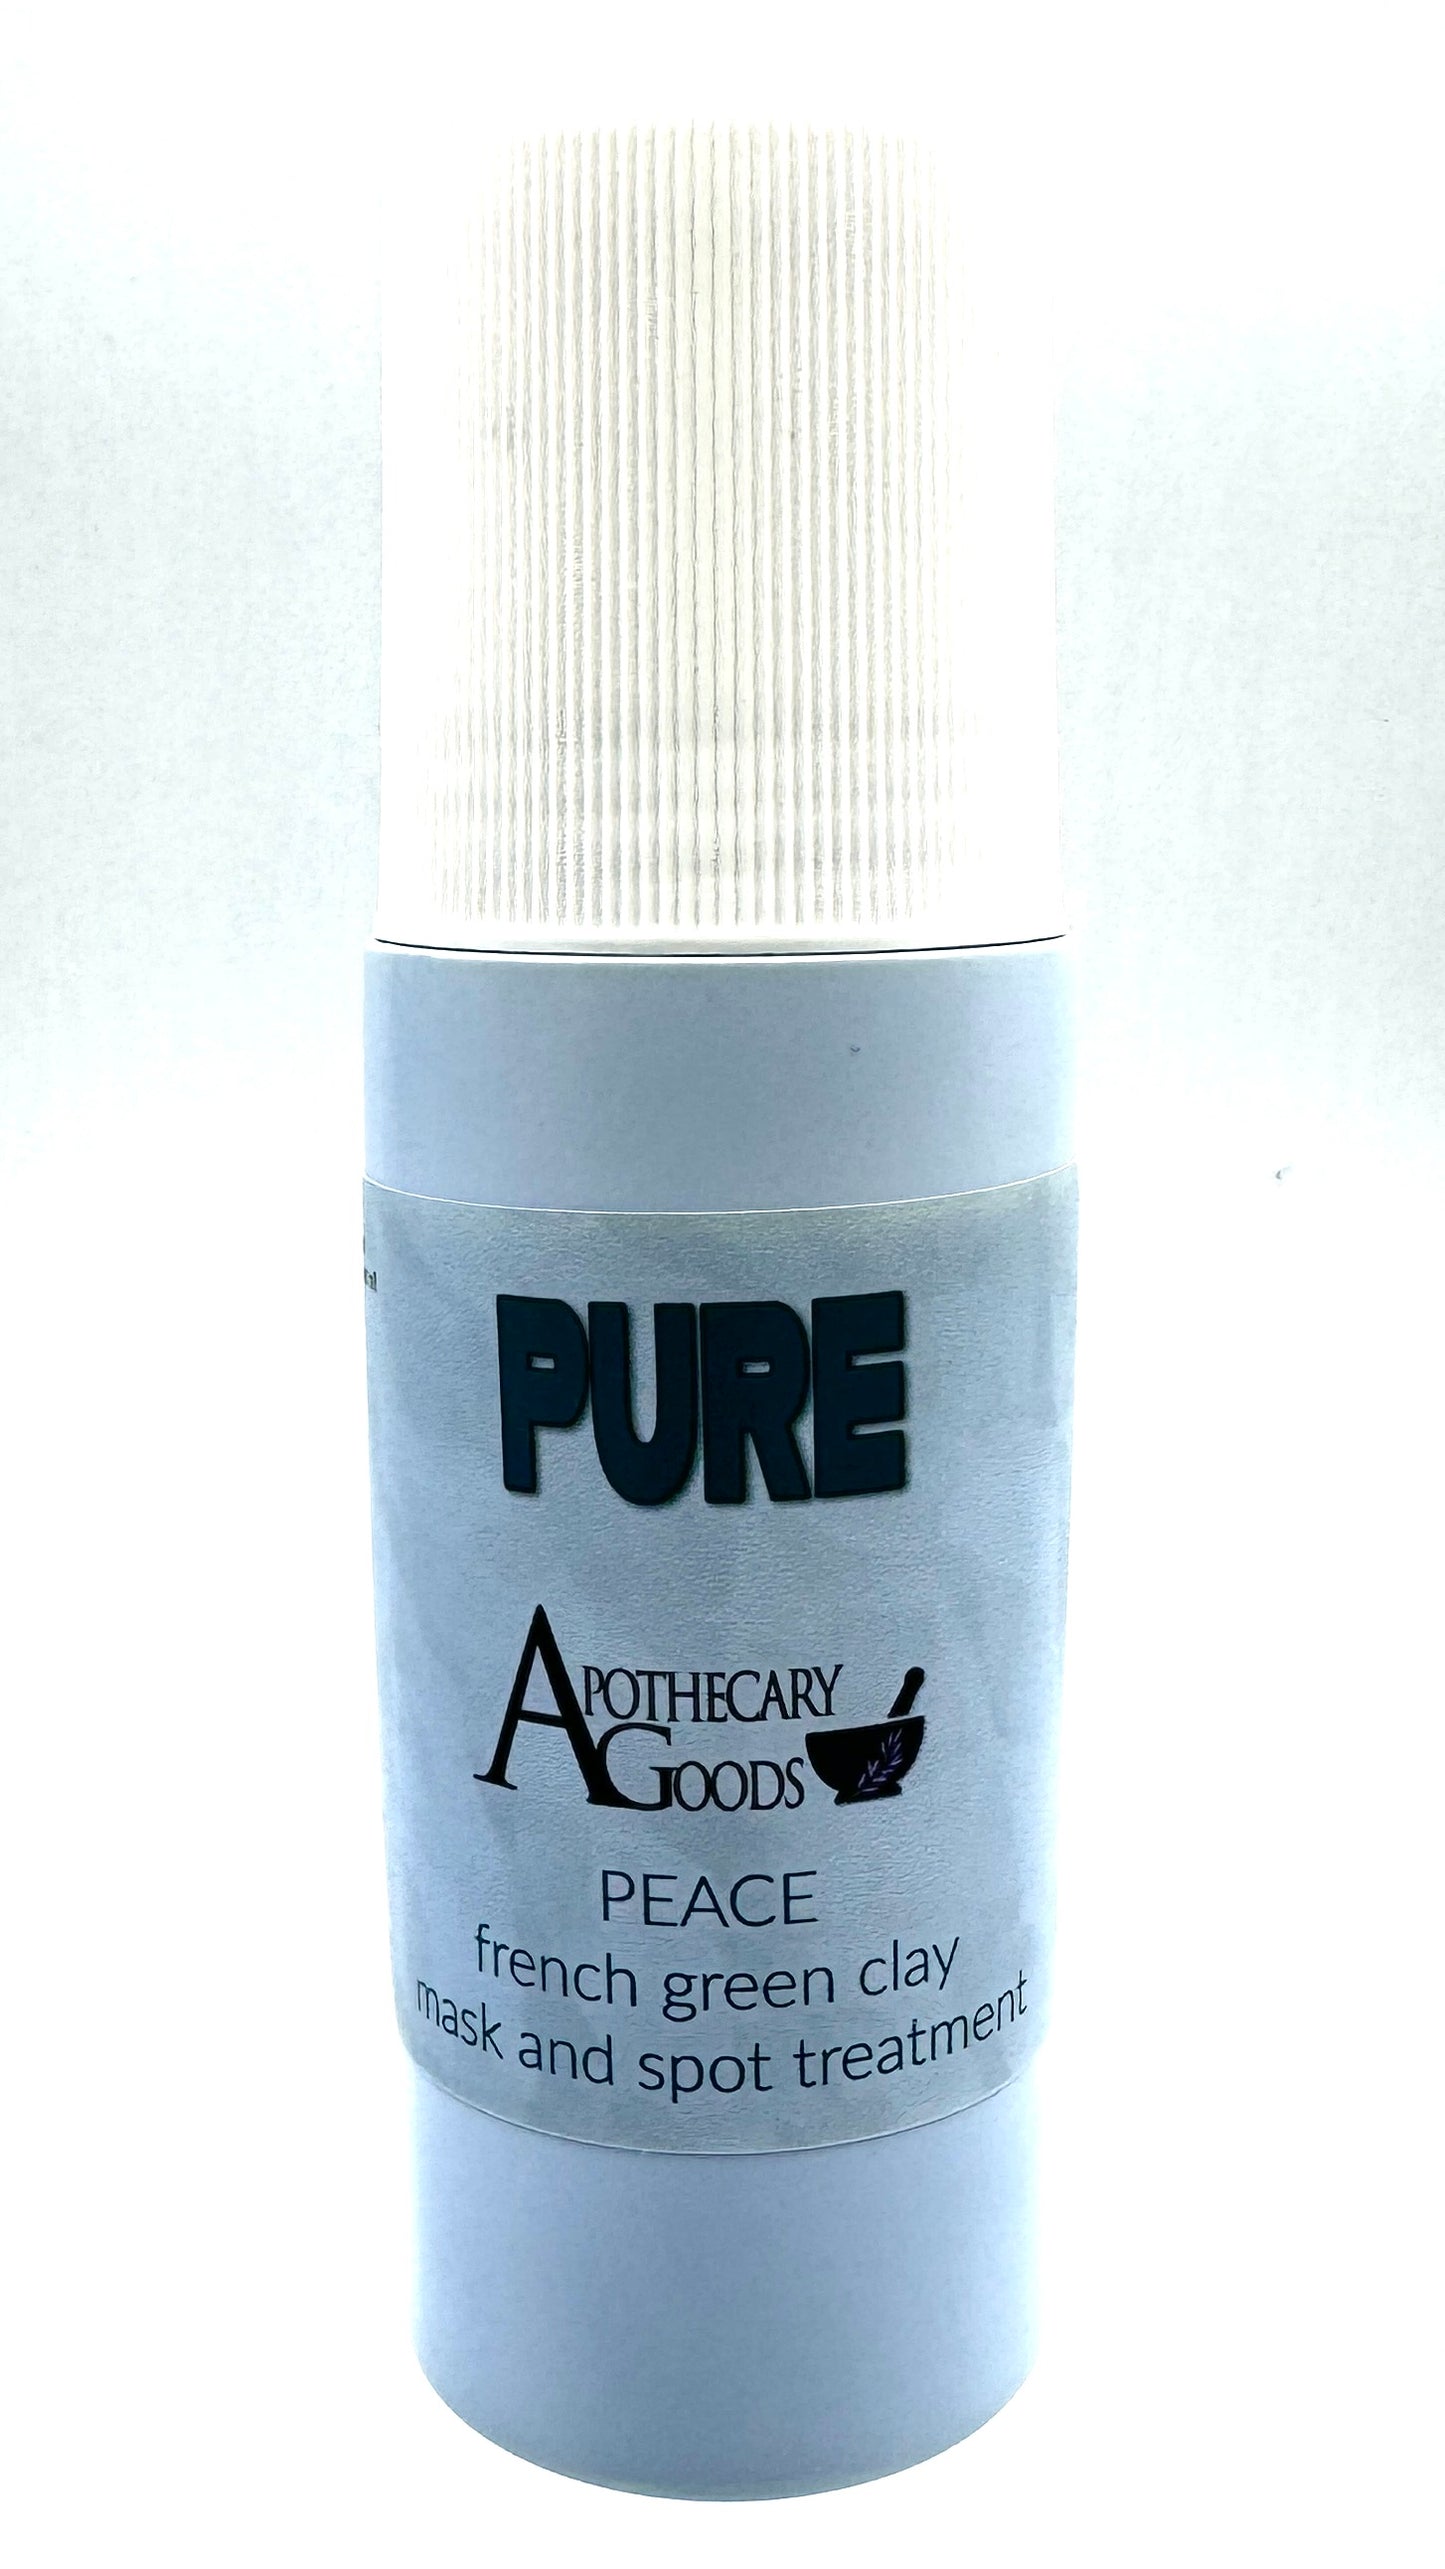 PURE Peace: Green French Clay mask and spot treatment 4 oz